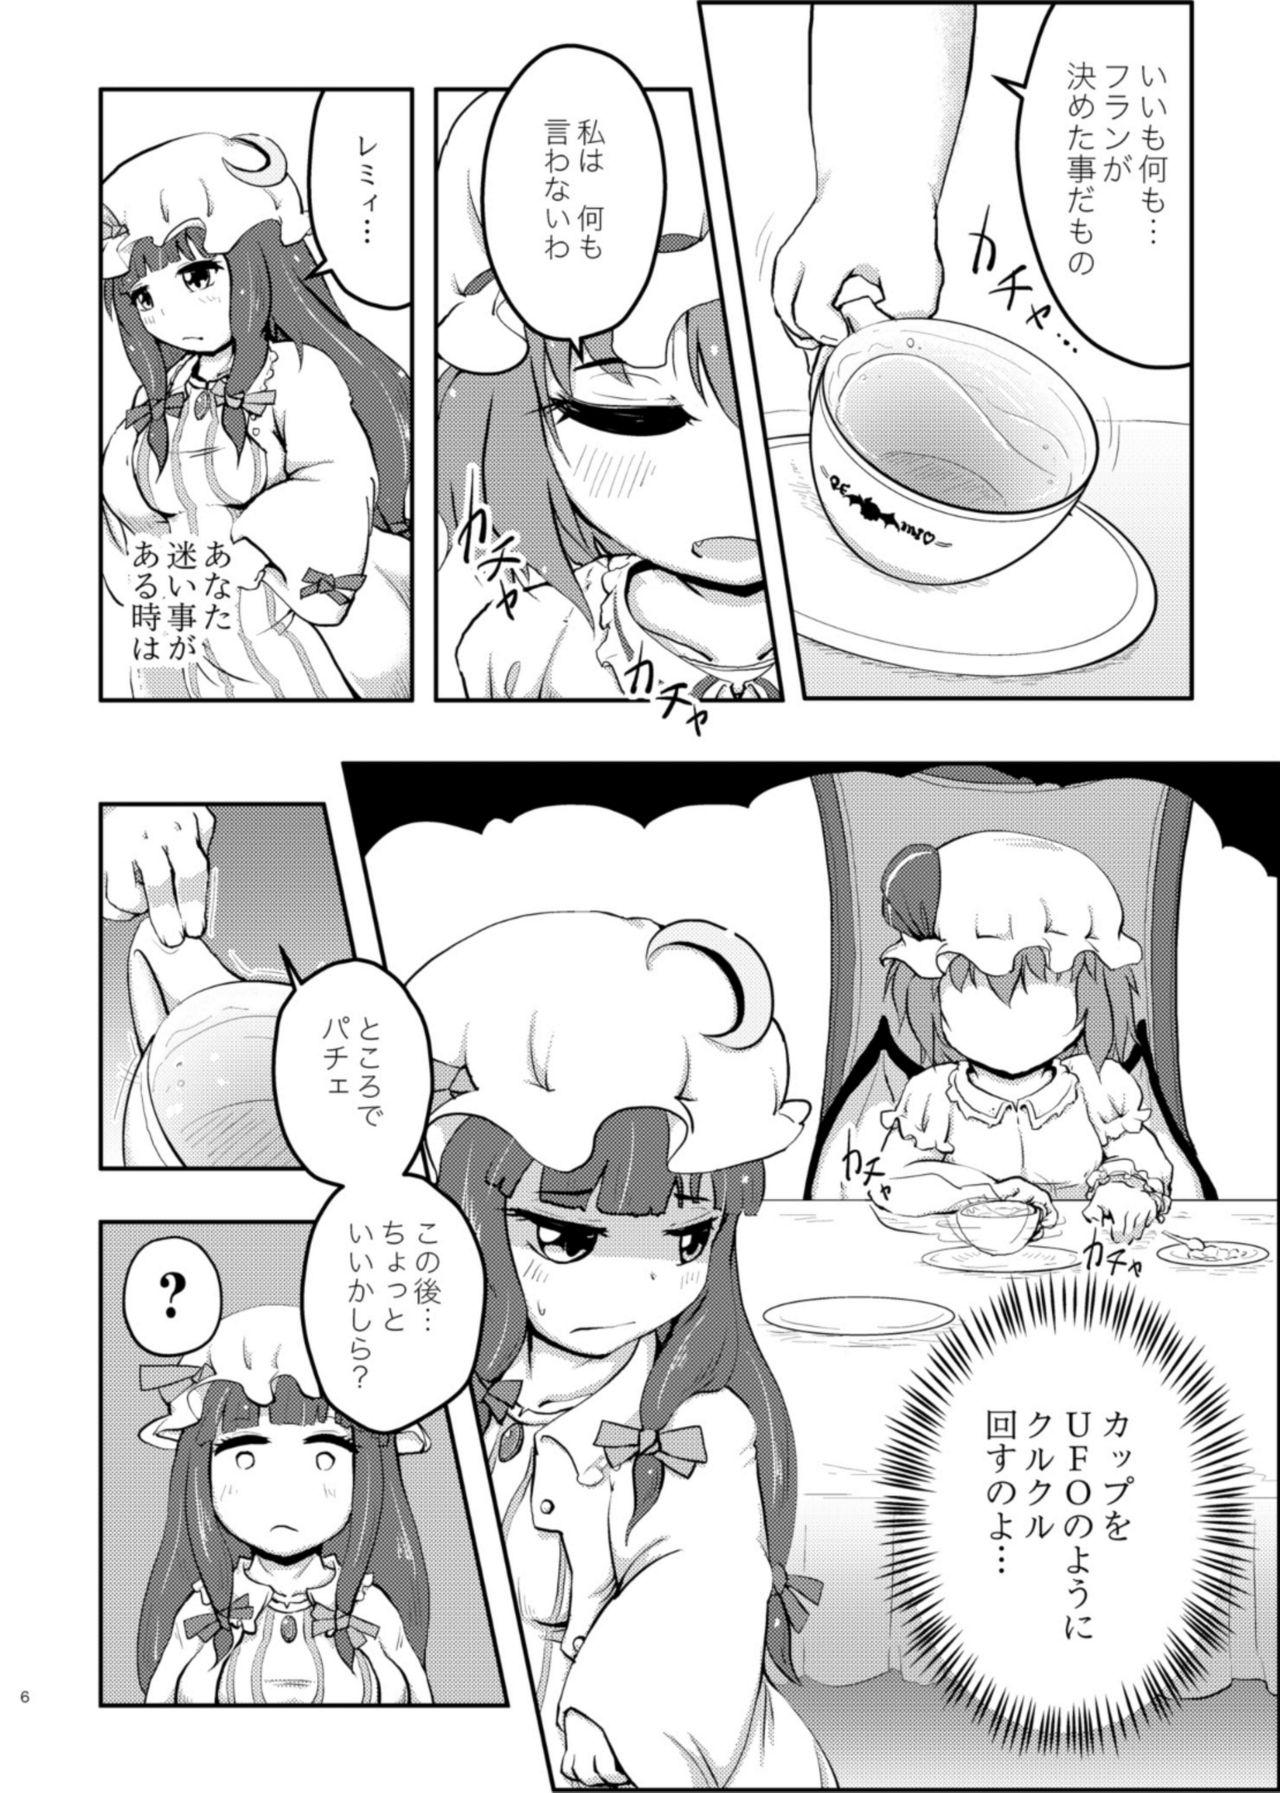 Lima Scarlet Conflict 2 - Touhou project Gay Medical - Page 6